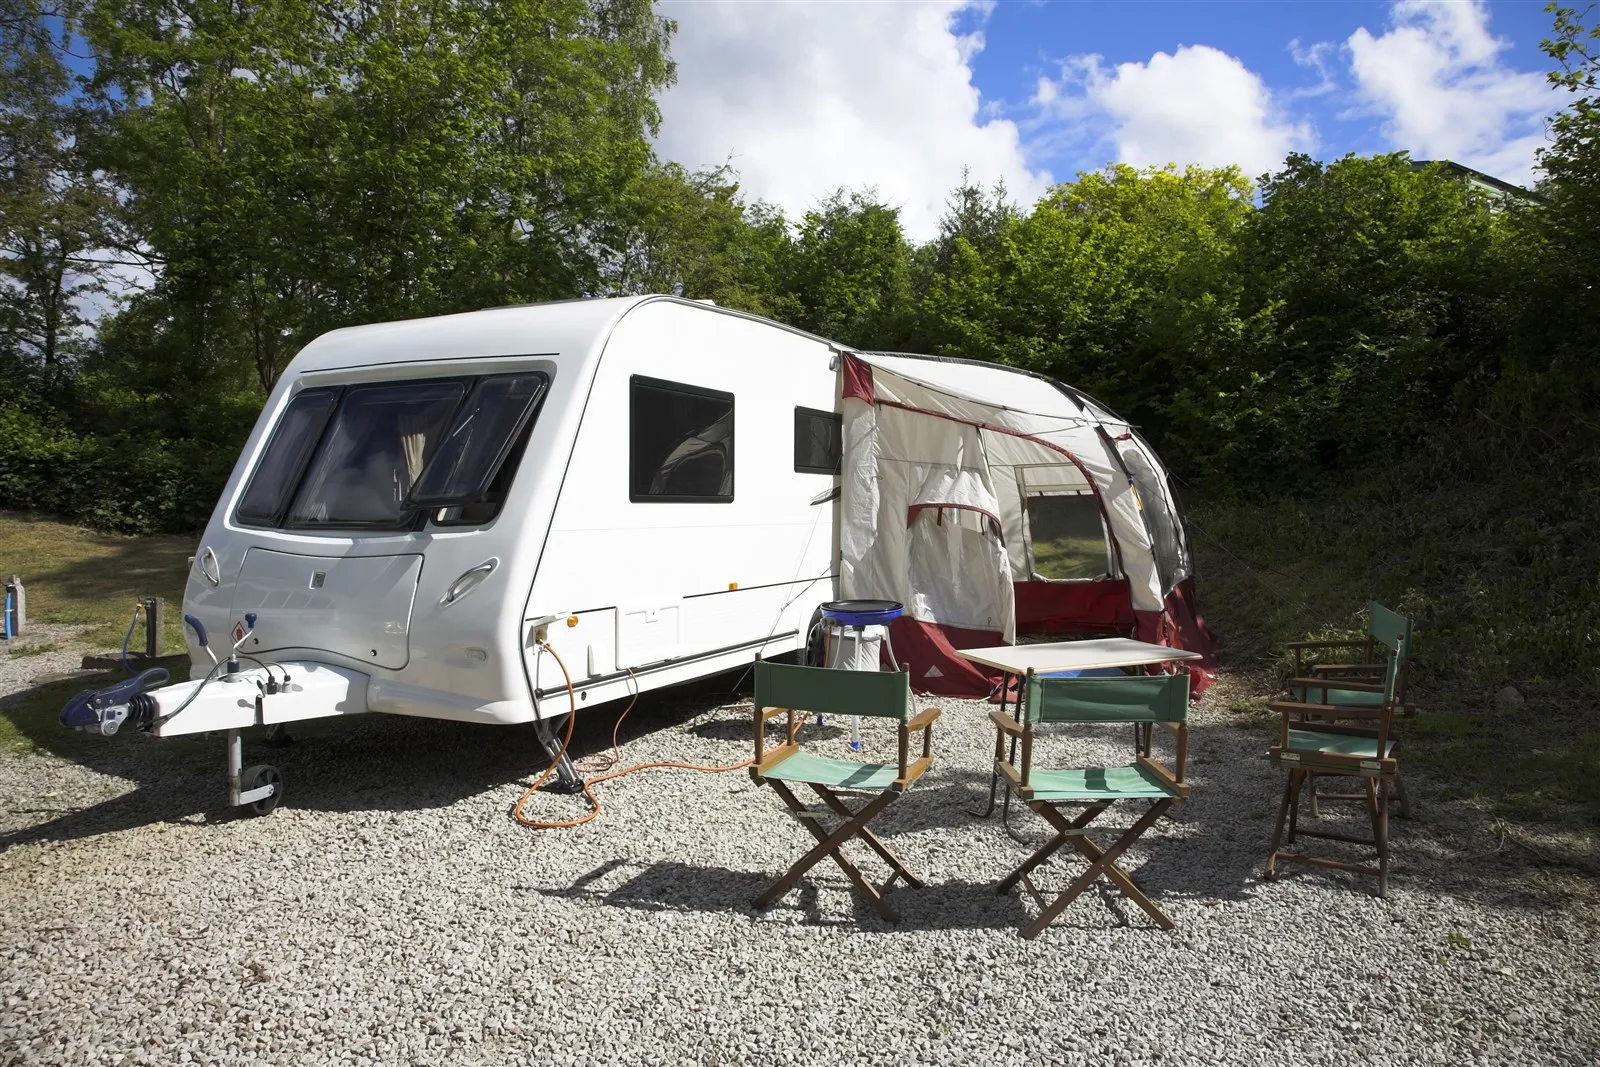 Your introduction to buying a caravan